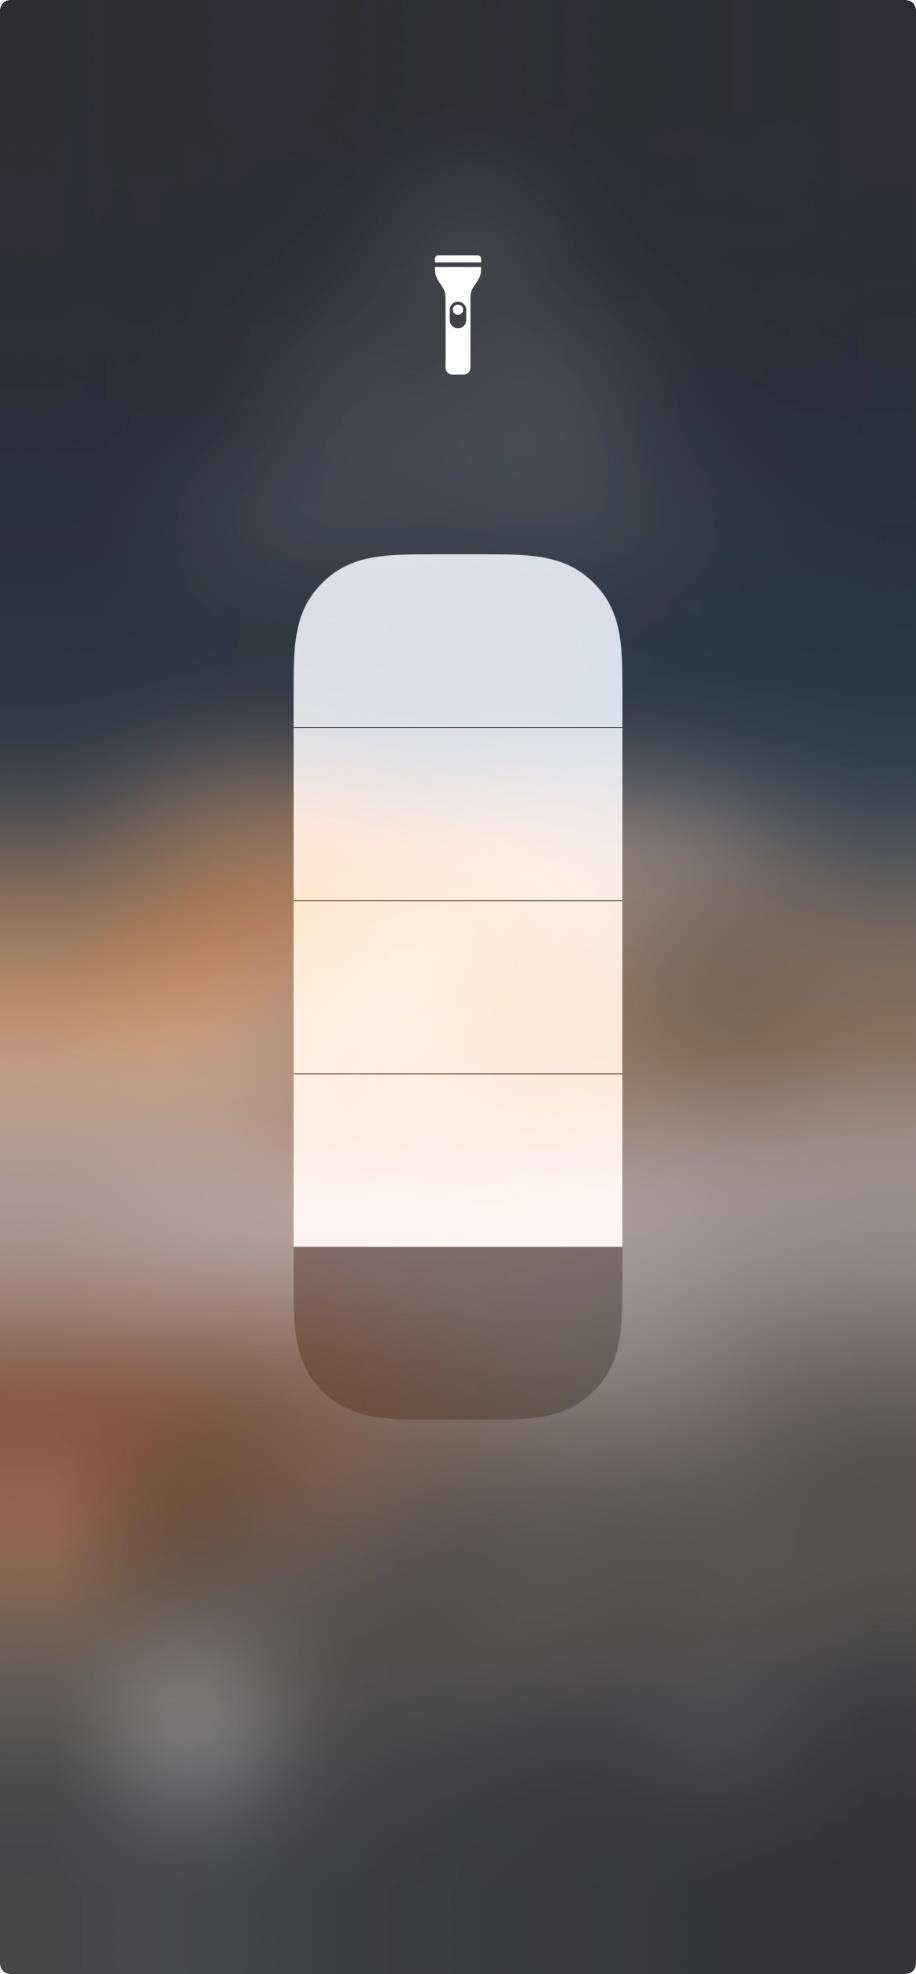 How to Change the Brightness of Your iPhone's Lock Screen Flashlight